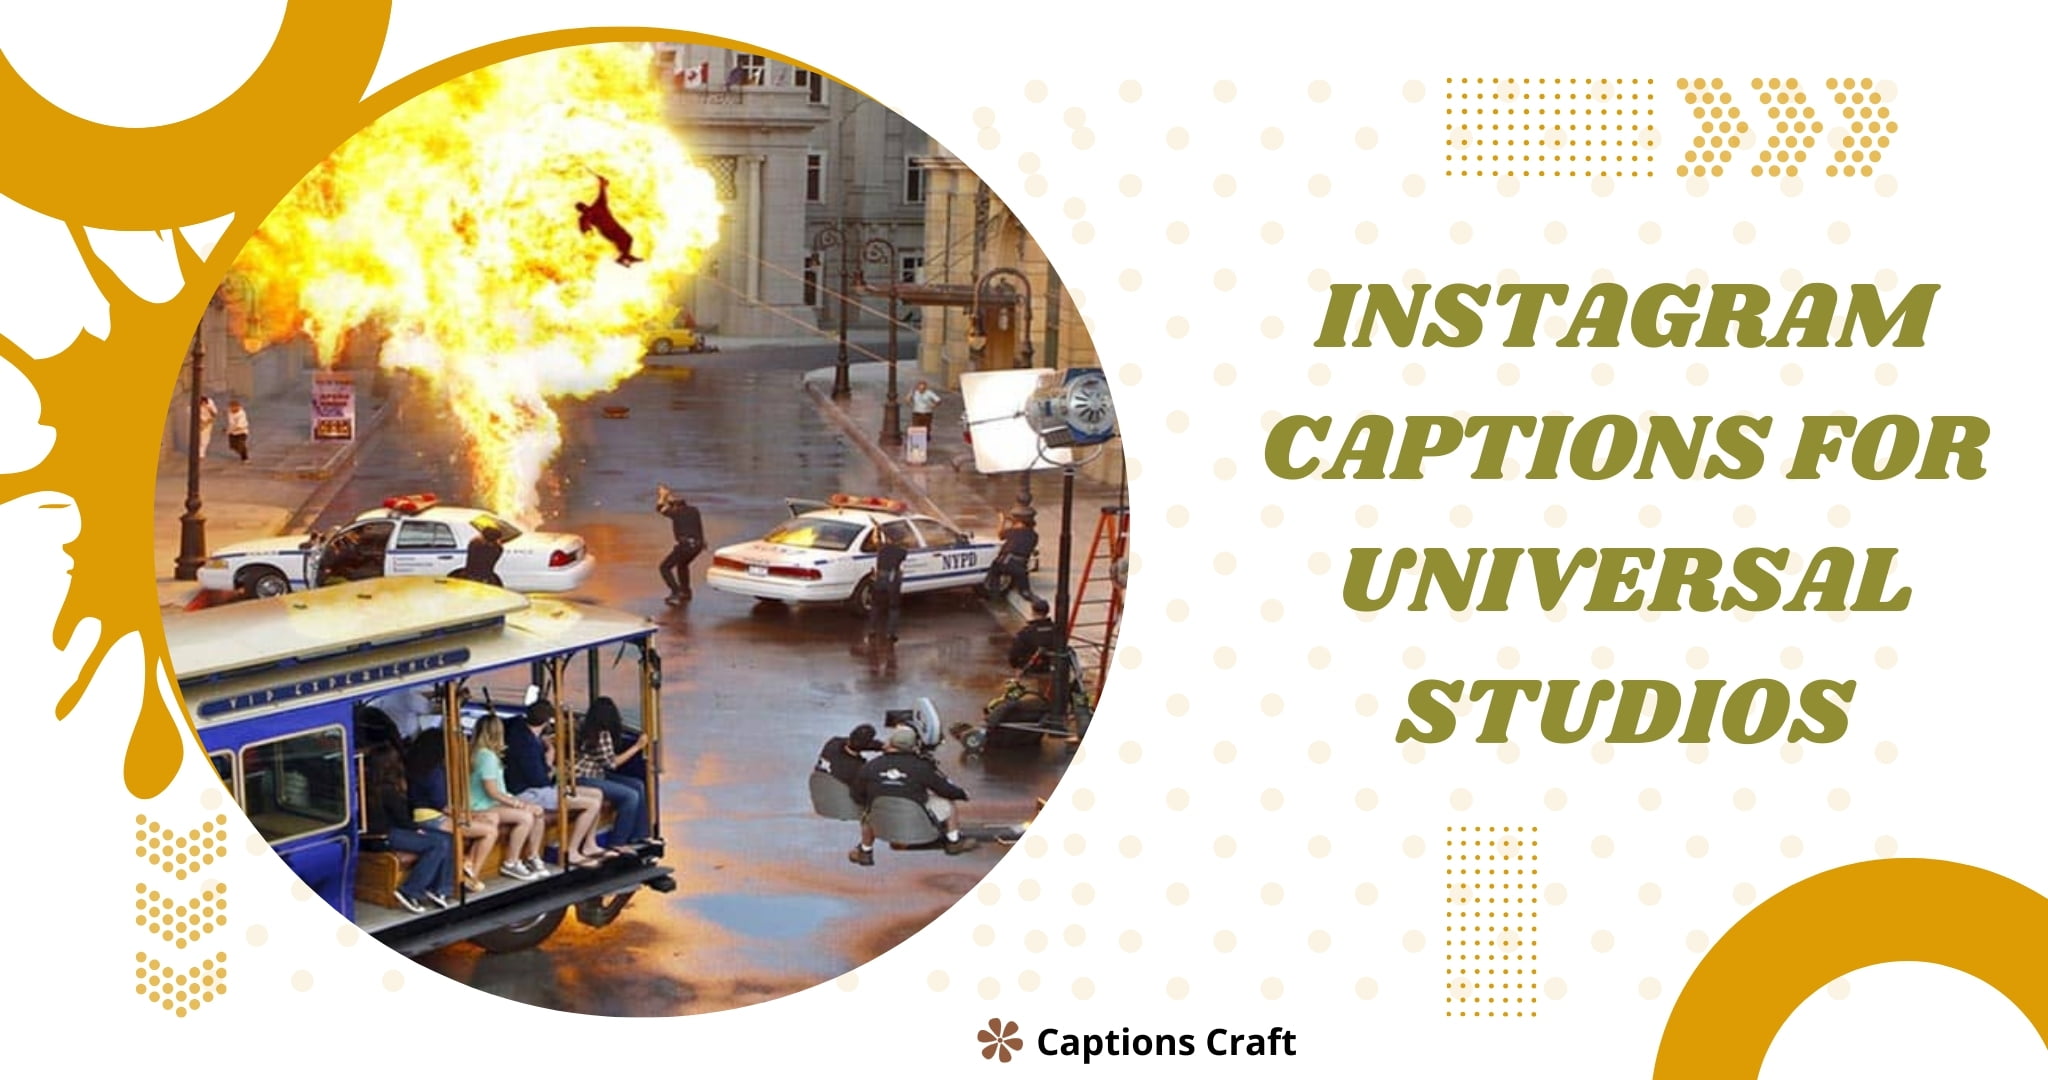 Instagram captions for Universal Studios: "Experience the magic of Universal Studios with these captivating captions. Share your unforgettable moments with the world!"